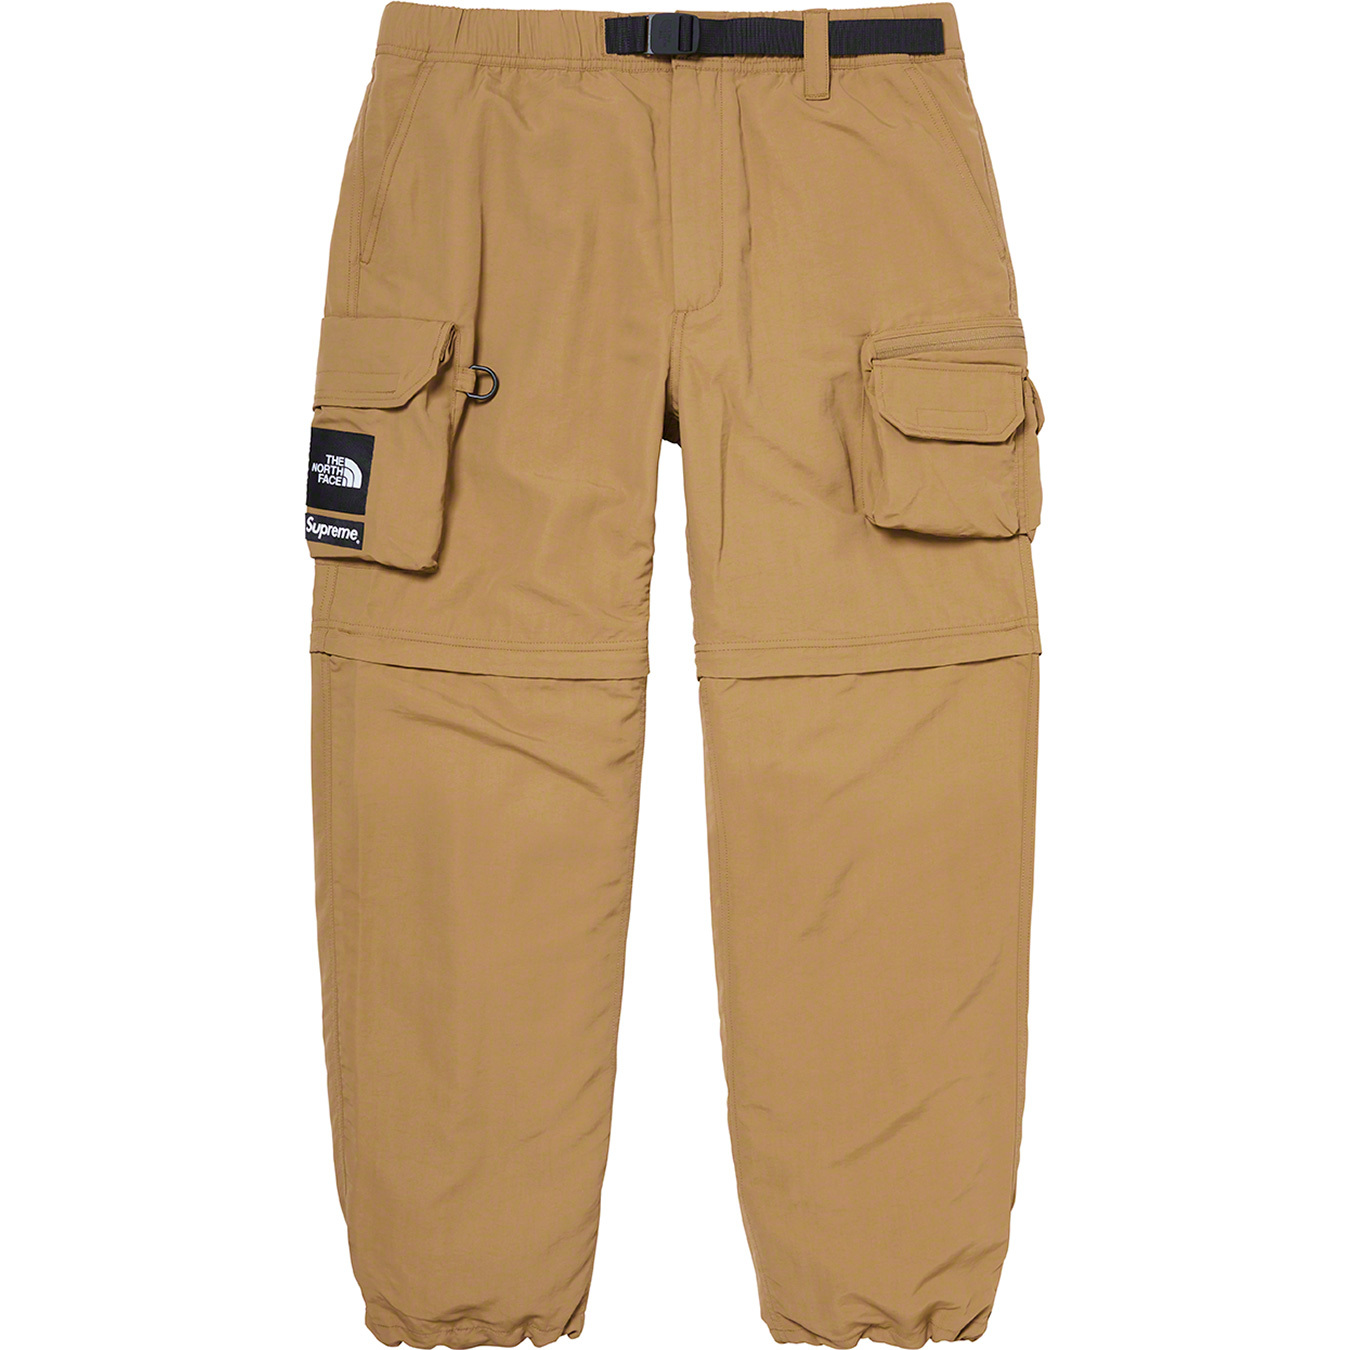 Supreme®/The North Face® Cargo pant